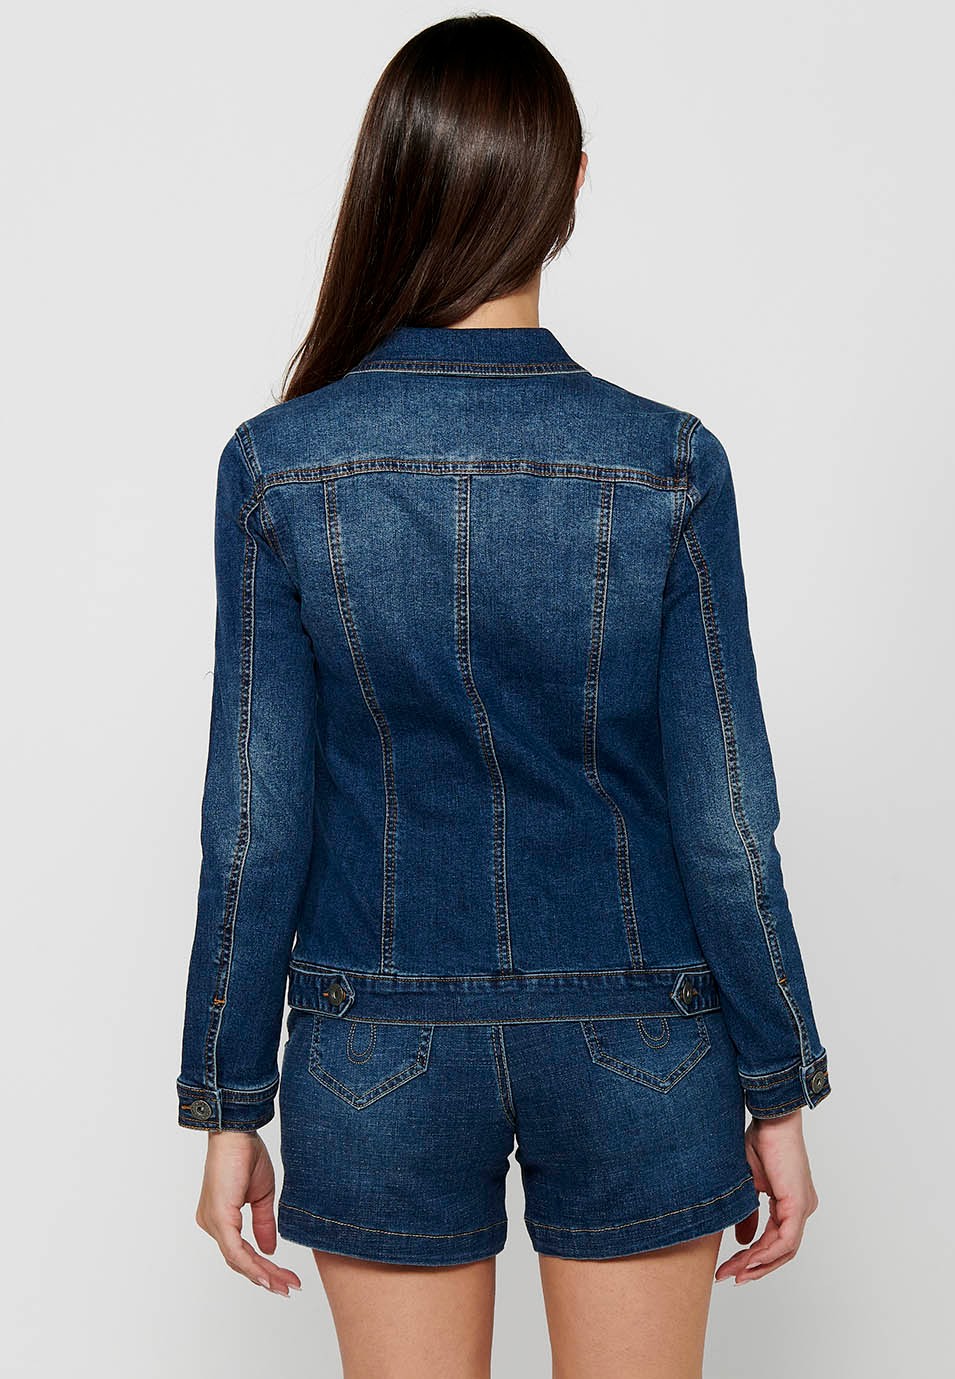 Long-sleeved denim jacket with ethnic fabric detail and front closure with blue buttons for women 5